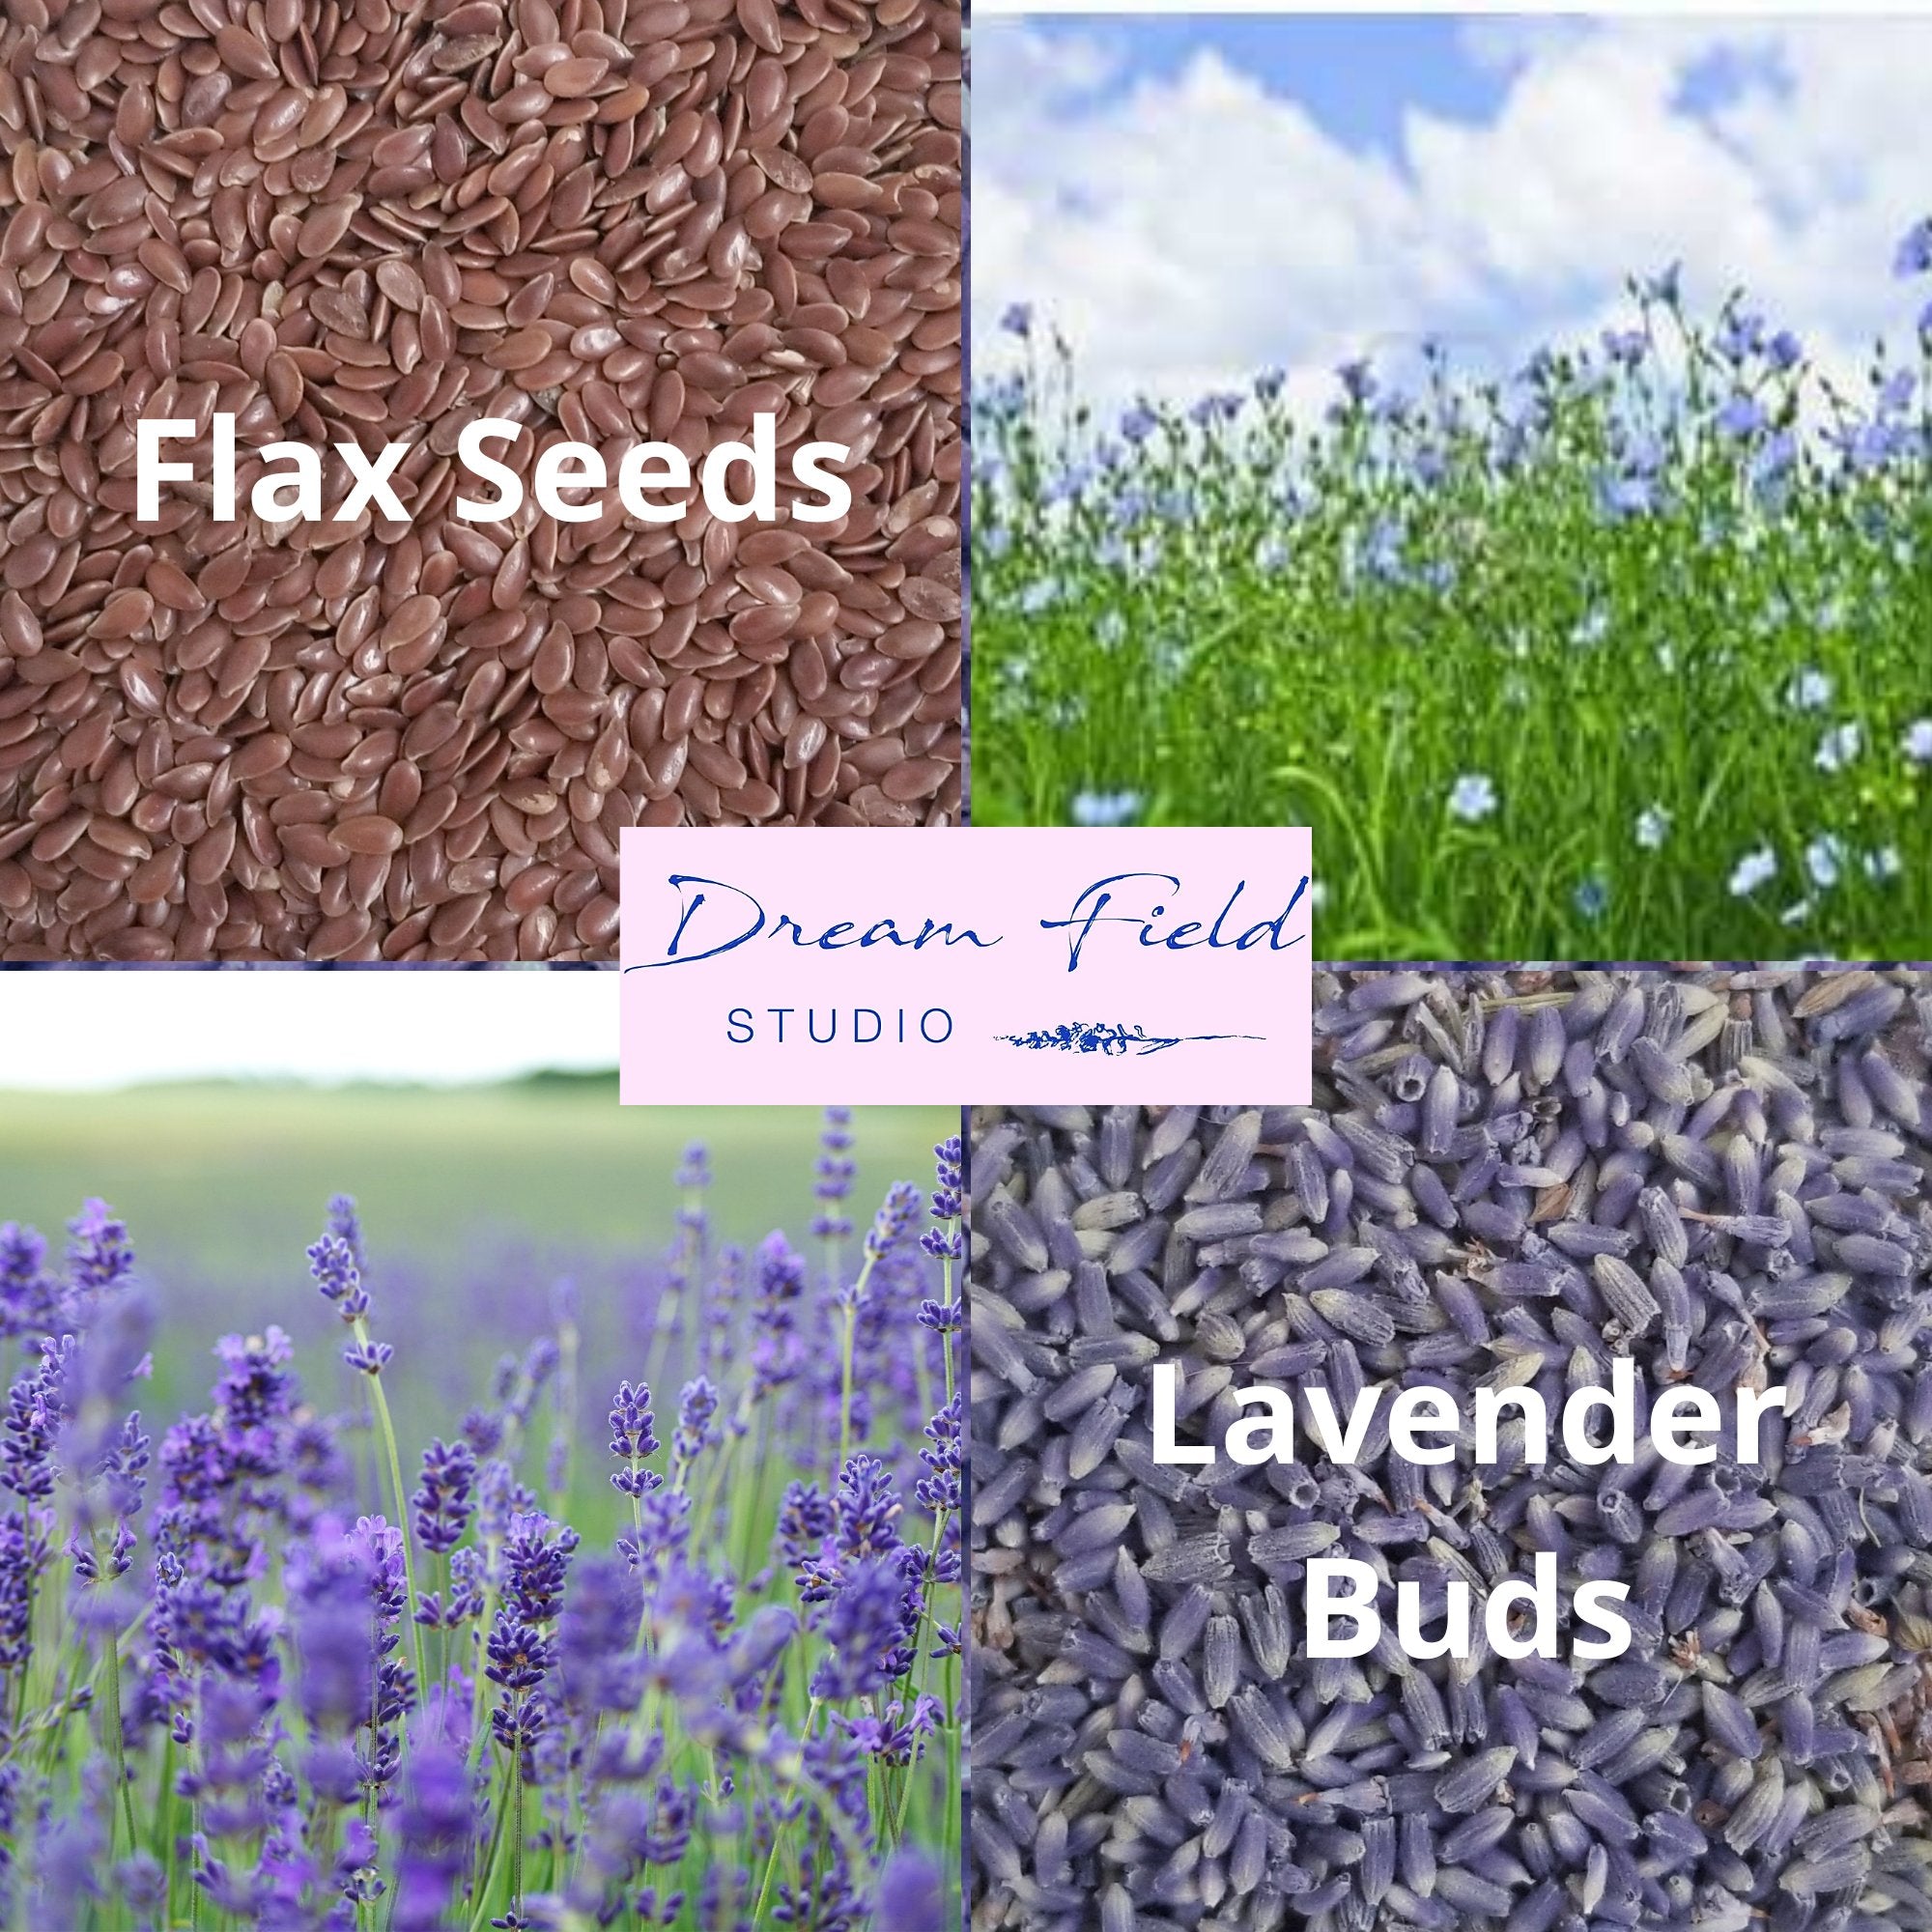 Infographic of flax seeds, organic lavender buds by Dream Field Studio